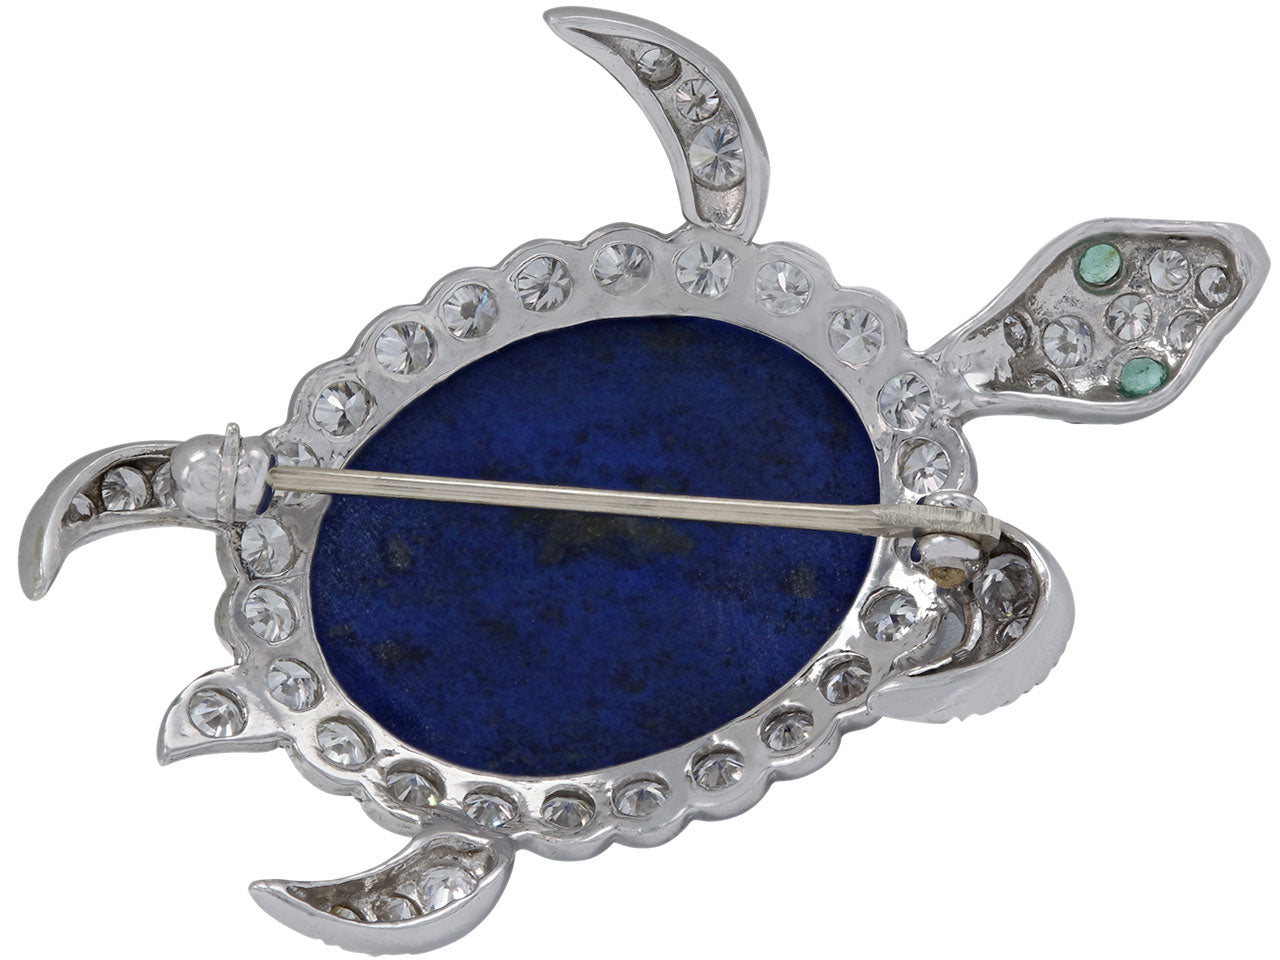 Mid-Century Lapis Turtle Brooch with Diamonds in 14K White Gold